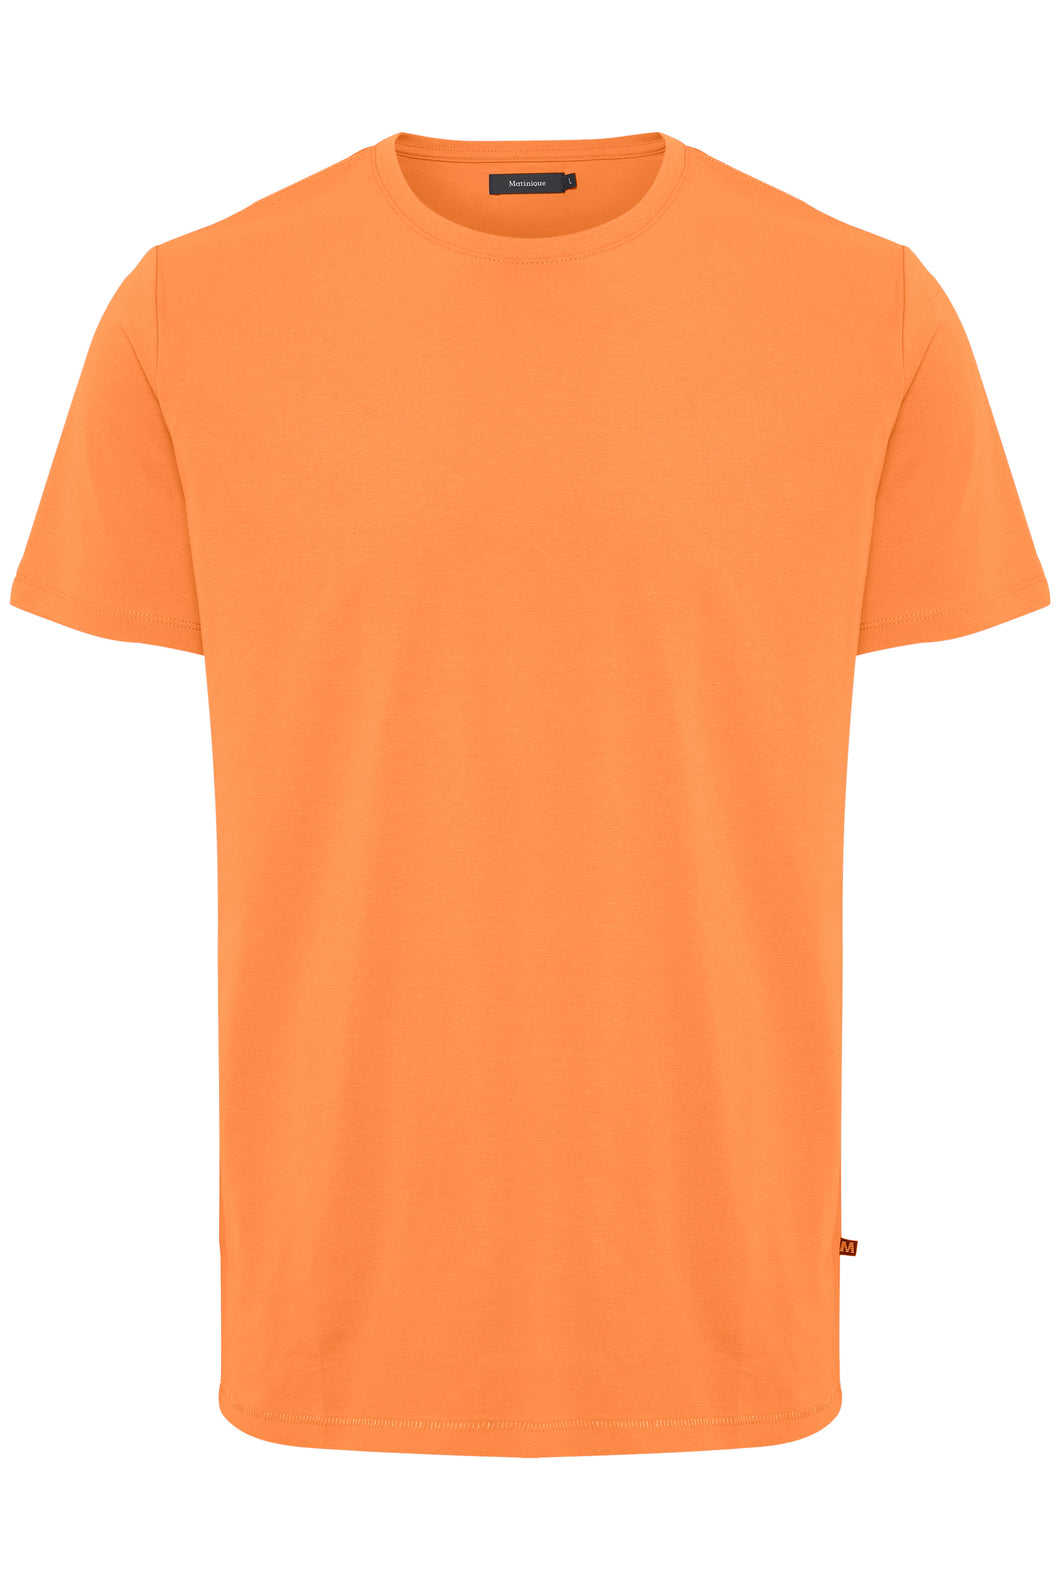 MATINIQUE - Jermalink Tee - Coral Gold